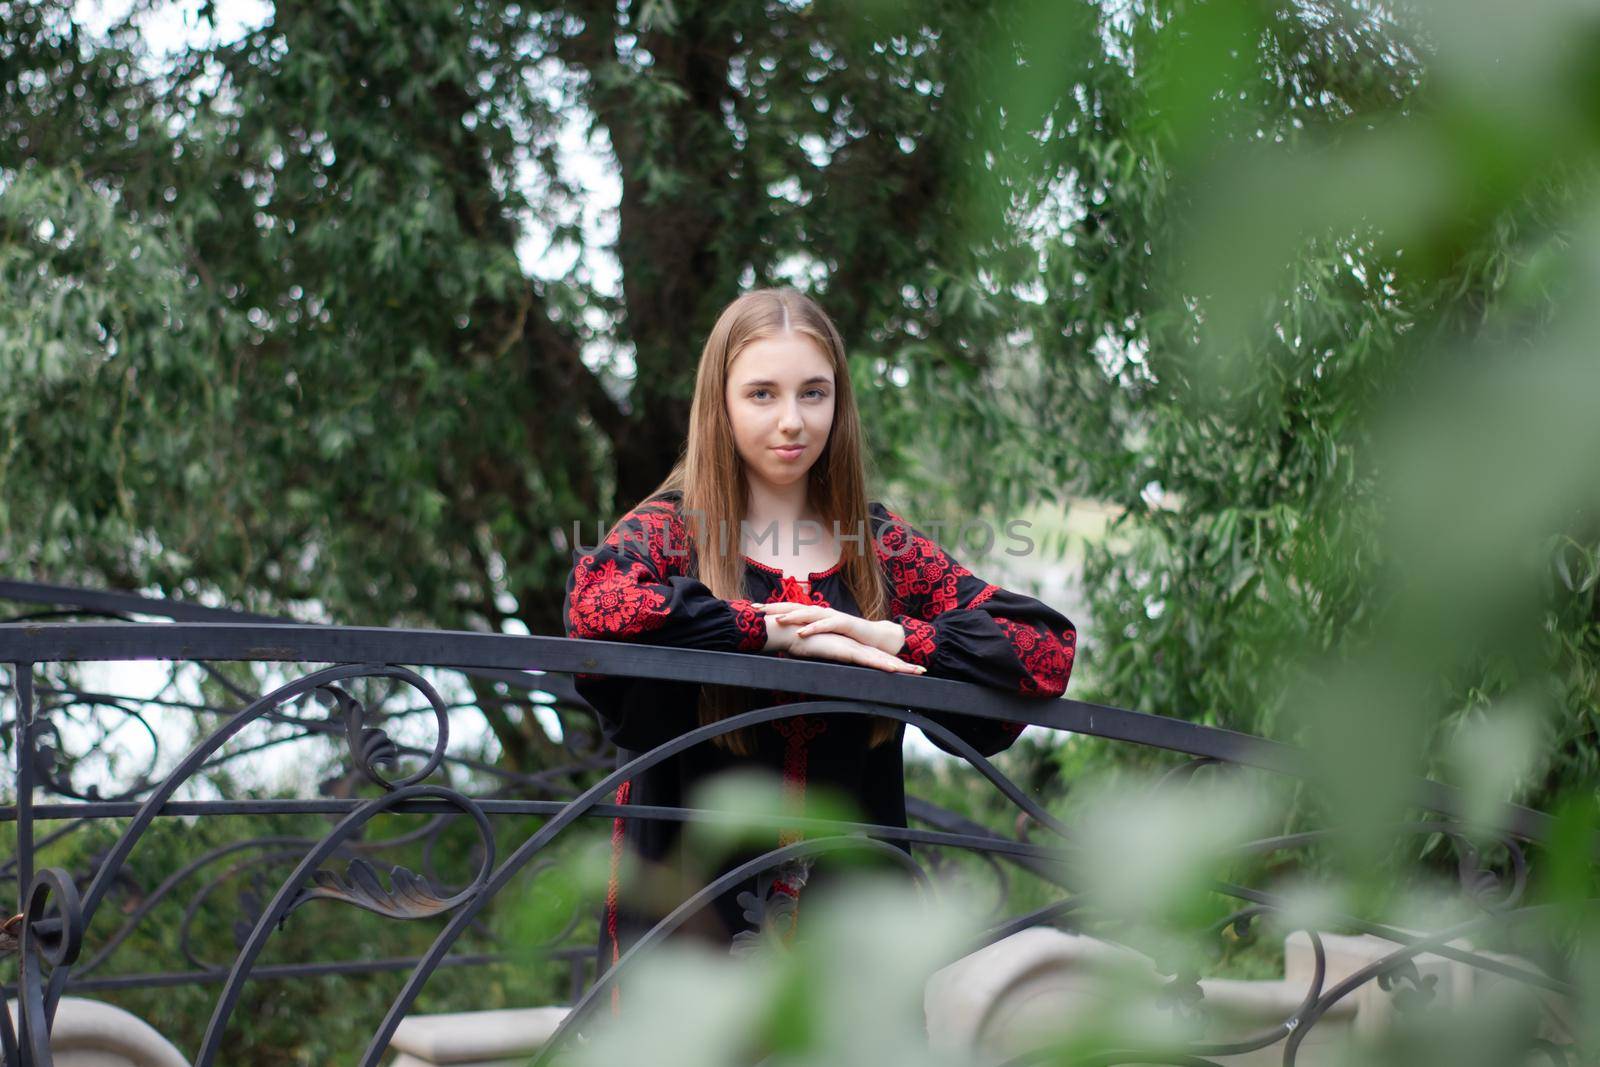 charming ukrainian young woman in embroidered national red and black dress outdoors. pretty girl in park wearing vyshyvanka by oliavesna